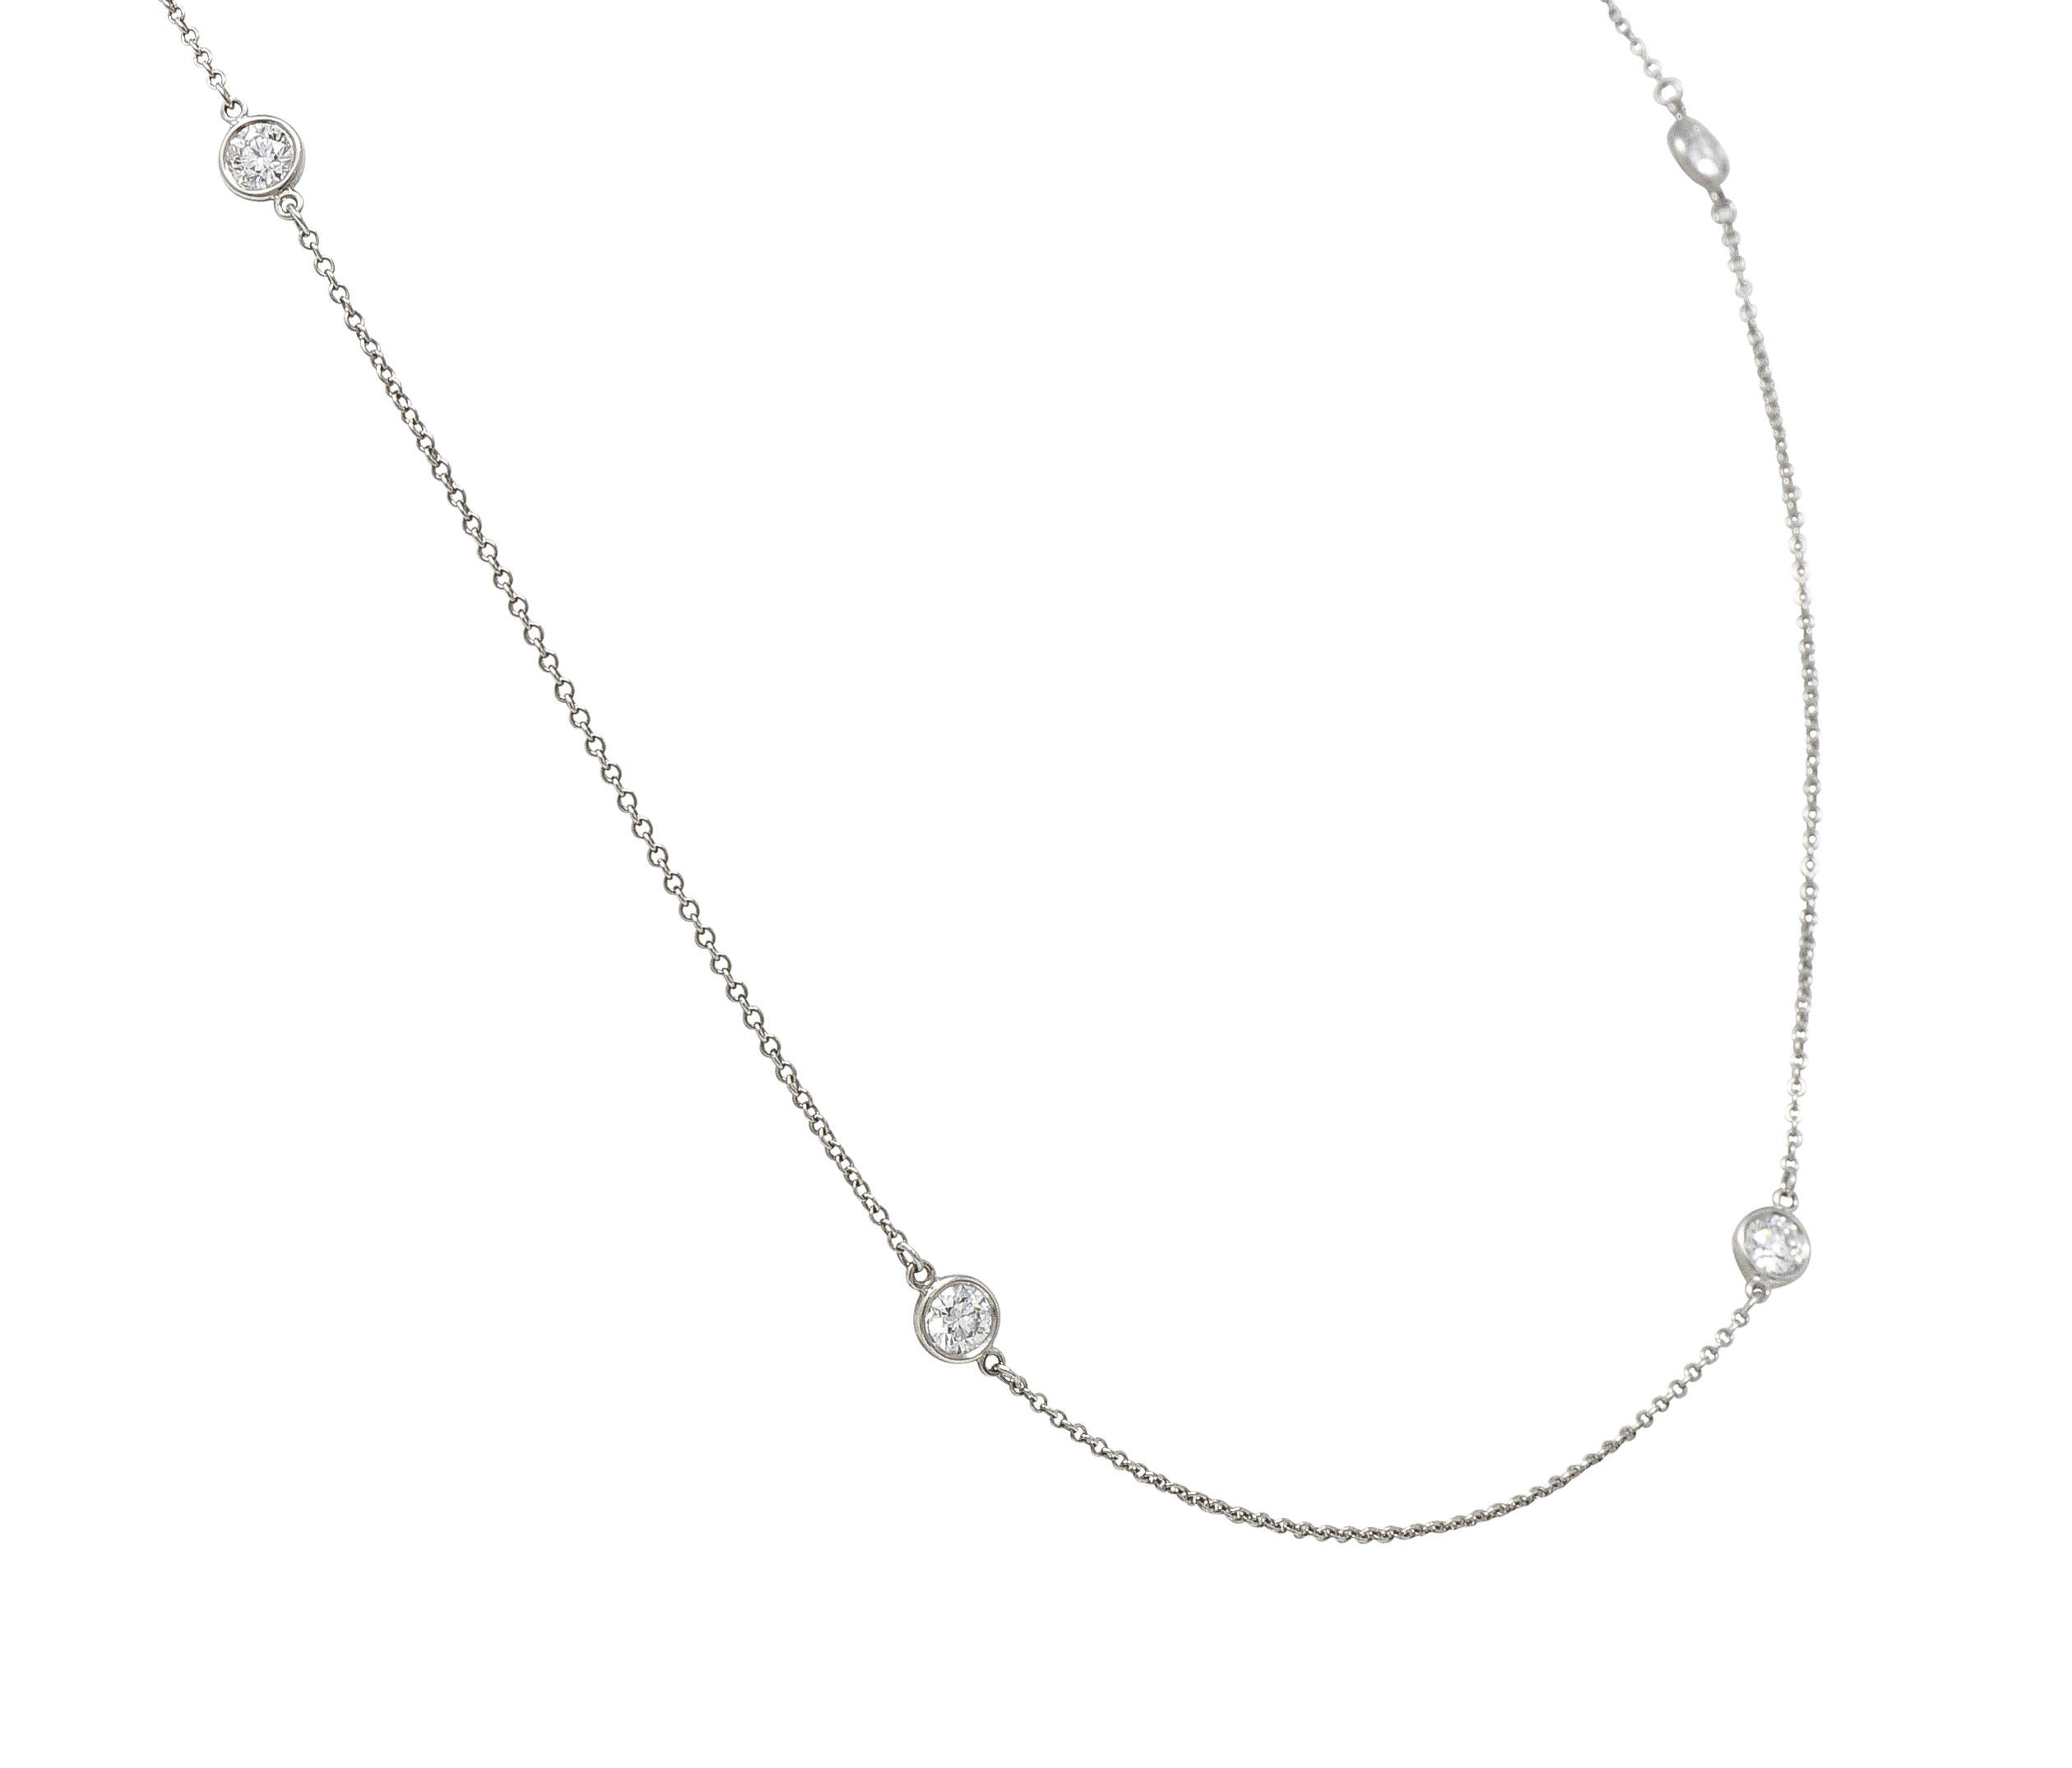 Designed as cable chain featuring fived bezel set round brilliant cut diamond stations
Weighing approximately 1.00 carat total - F/G color with VS clarity
With high polish finish
Stamped for platinum
Numbered and fully signed for Elsa Peretti for